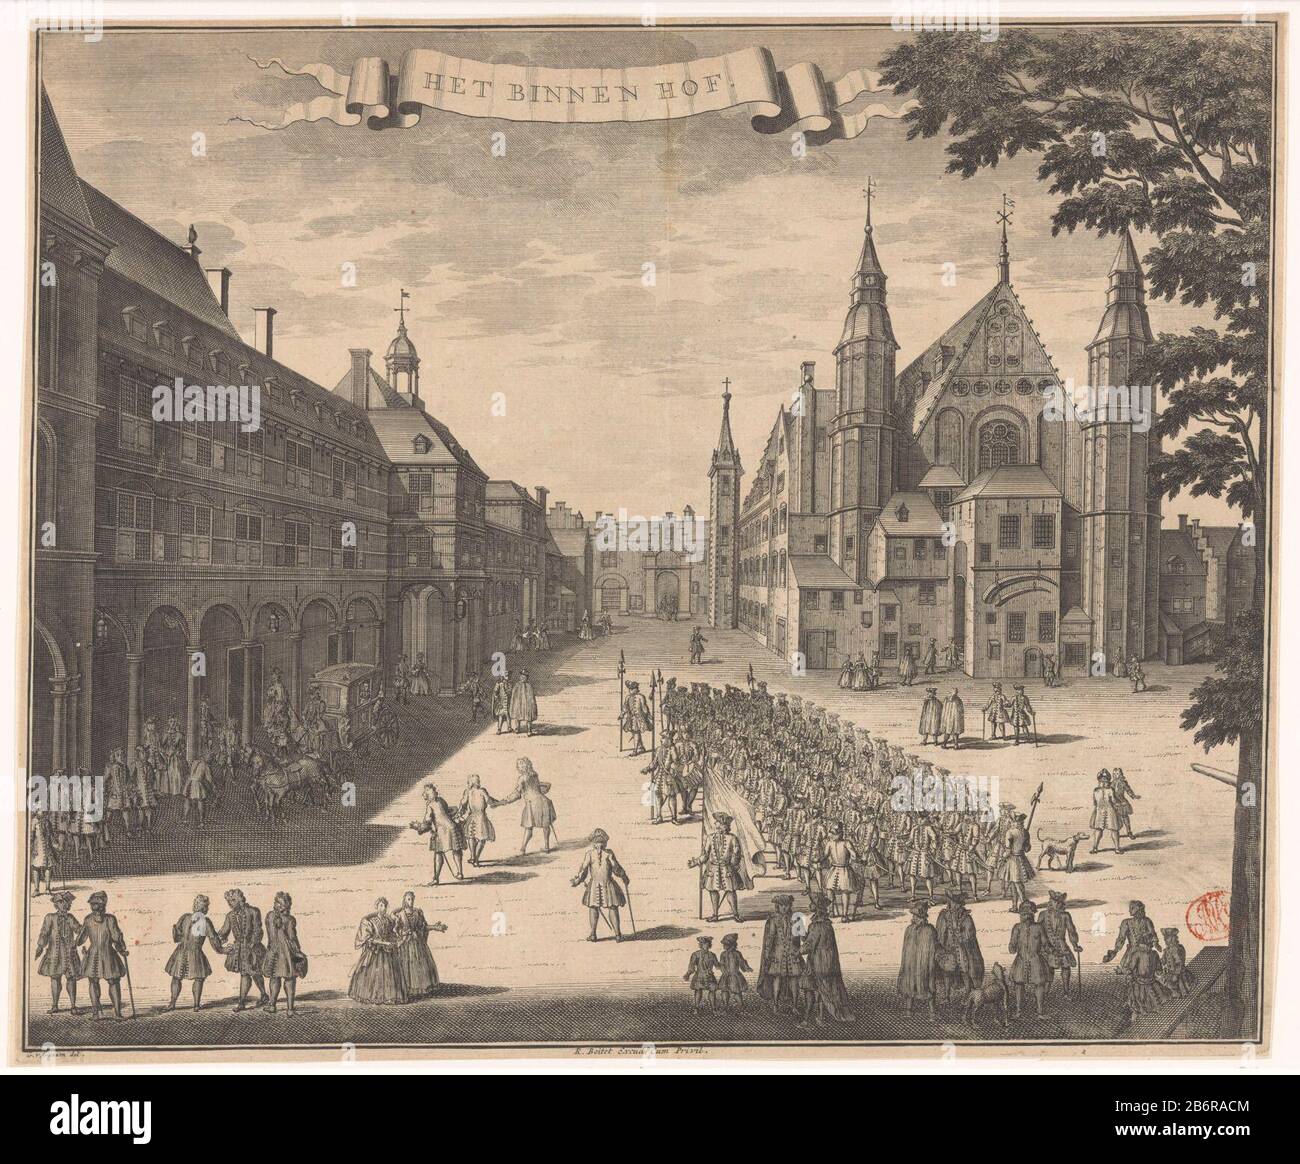 Gezicht op het Binnenhof te Den Haag Het Binnen hof (titel op object) View of the Binnenhof in the Hague, with the square several figuren. Manufacturer : printmaker: anonymous to drawing: Gerrit van Giessen (listed building) publisher: Reinier Boitet (listed building) publisher: Adrianus Douci Pietersz Grantor of privilege unknown (listed property) Place manufacture: from drawing: The Hague Publisher: Delft Publisher: Amsterdam Date: 1730 - 1736 Material: paper Technique: etching / engra (printing process) Dimensions: sheet: h 286 mm (cut up in a plate edge) plate edge b 345 mmToelichtingPrent Stock Photo